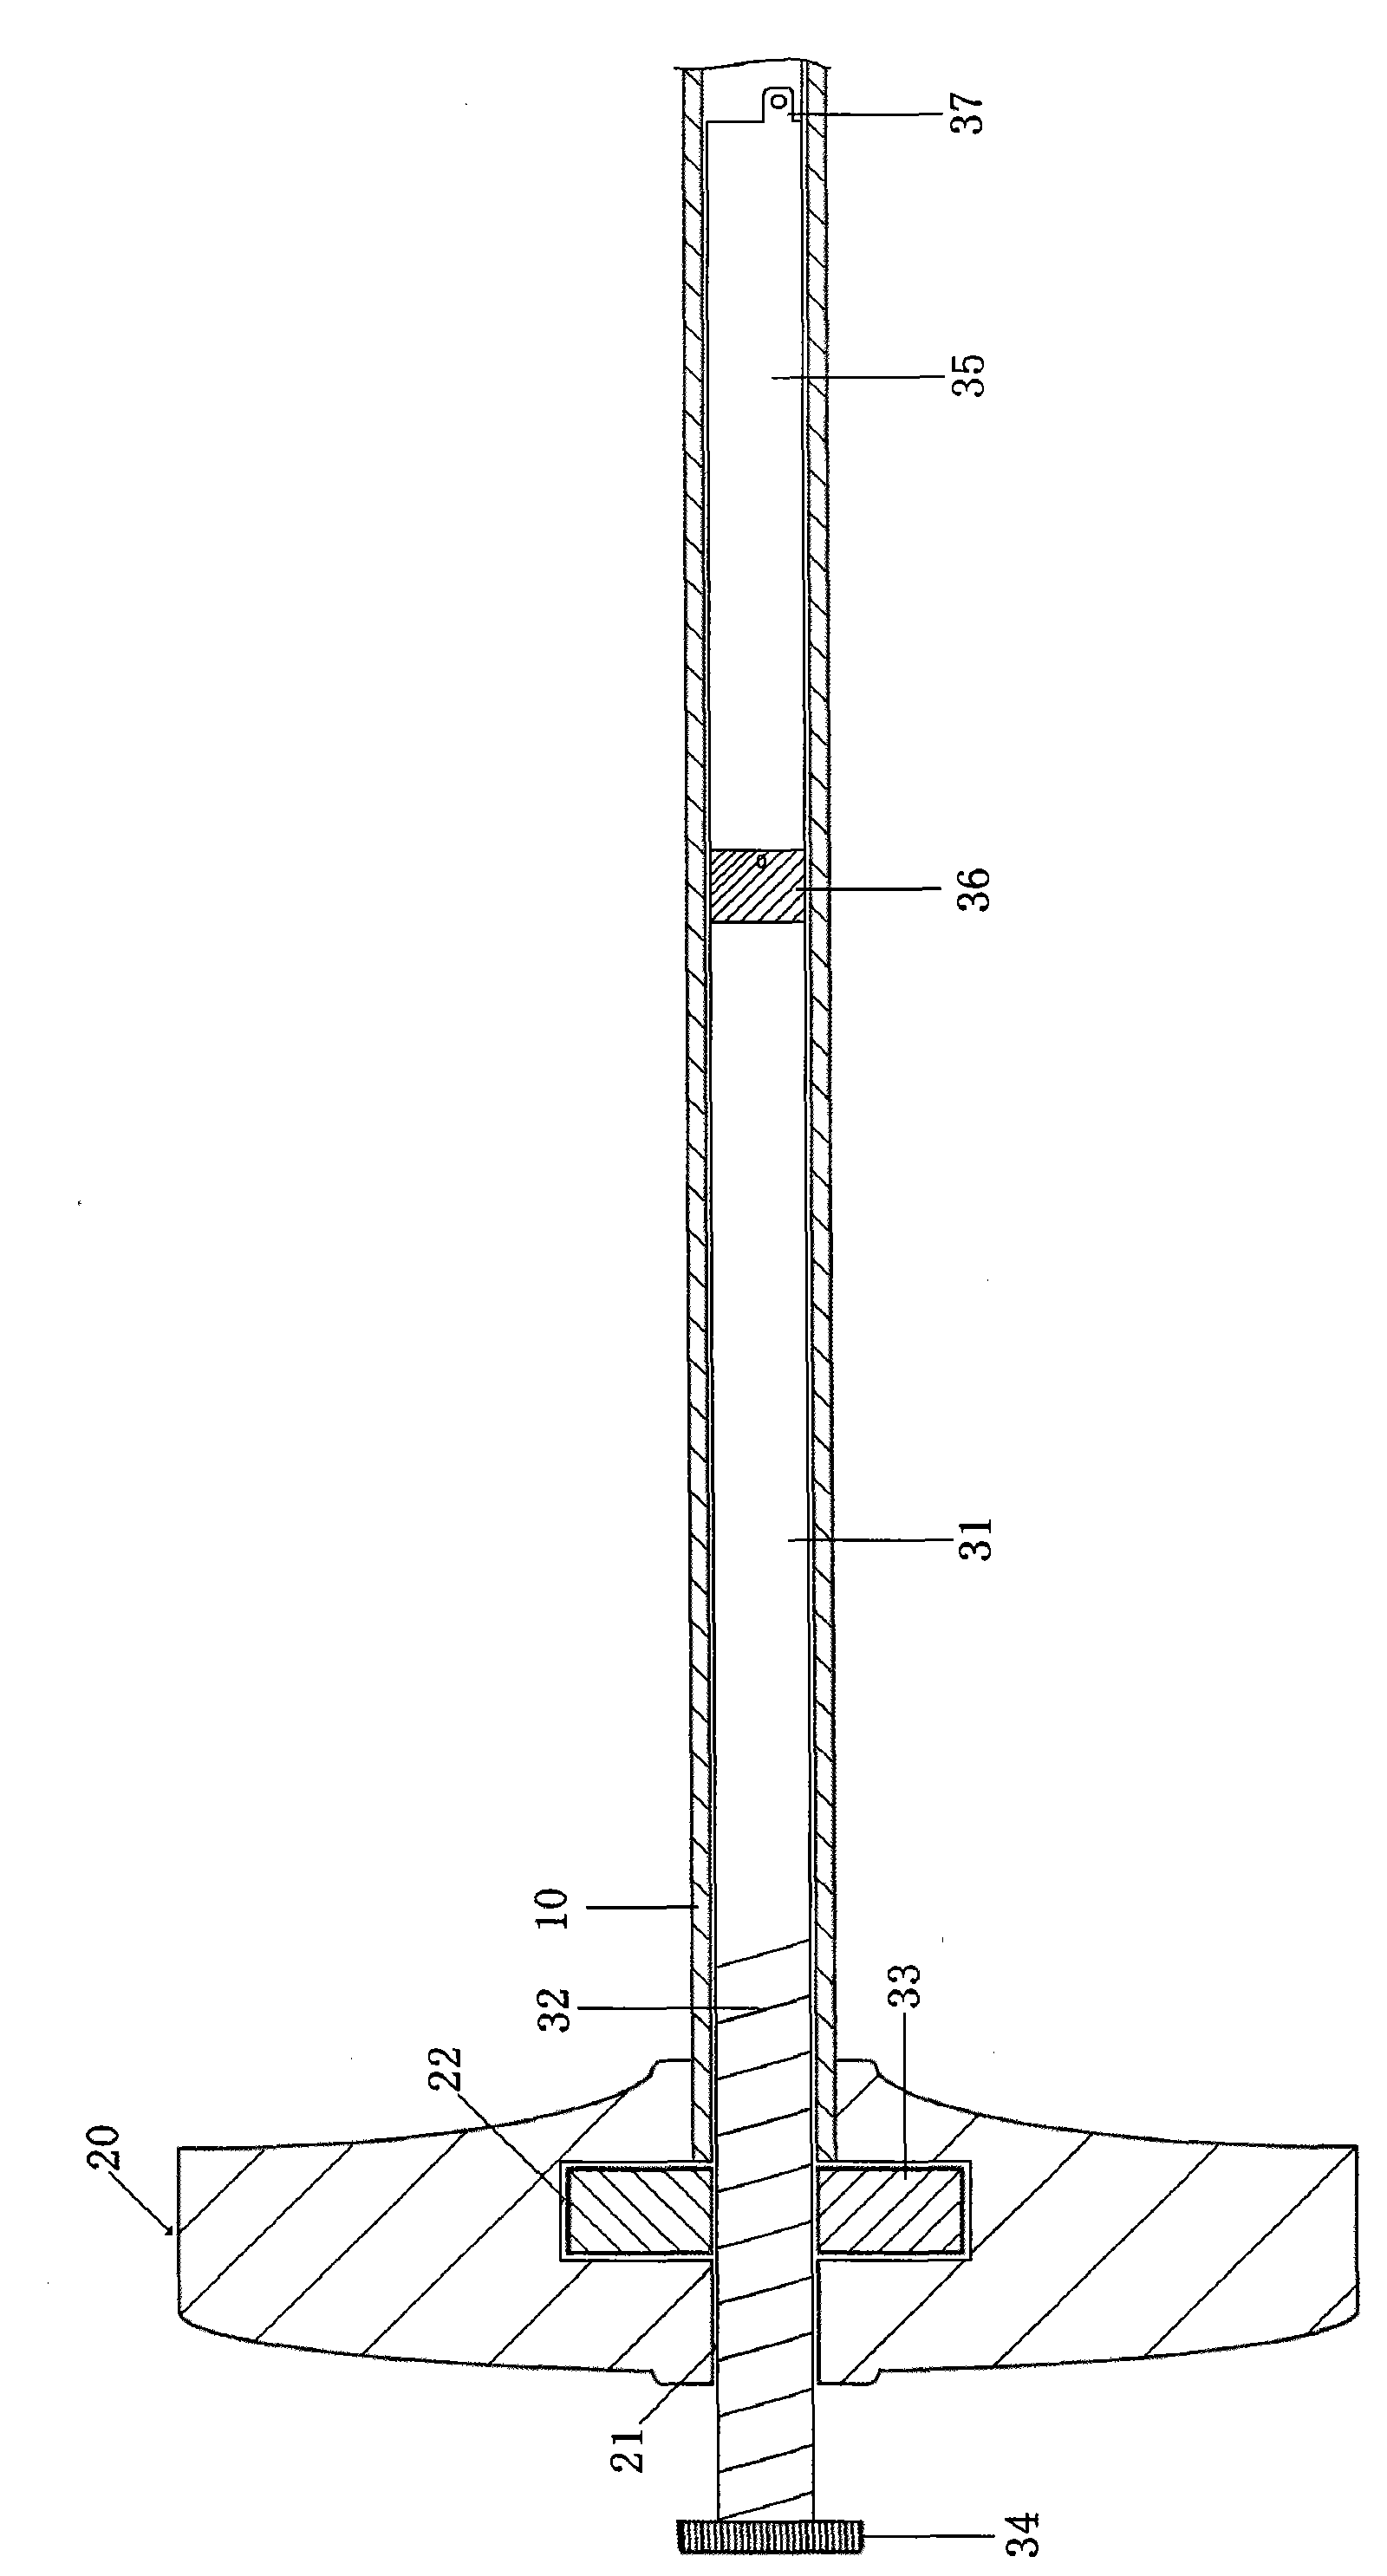 Stealth blade for treating aseptic caput femoris necrosis